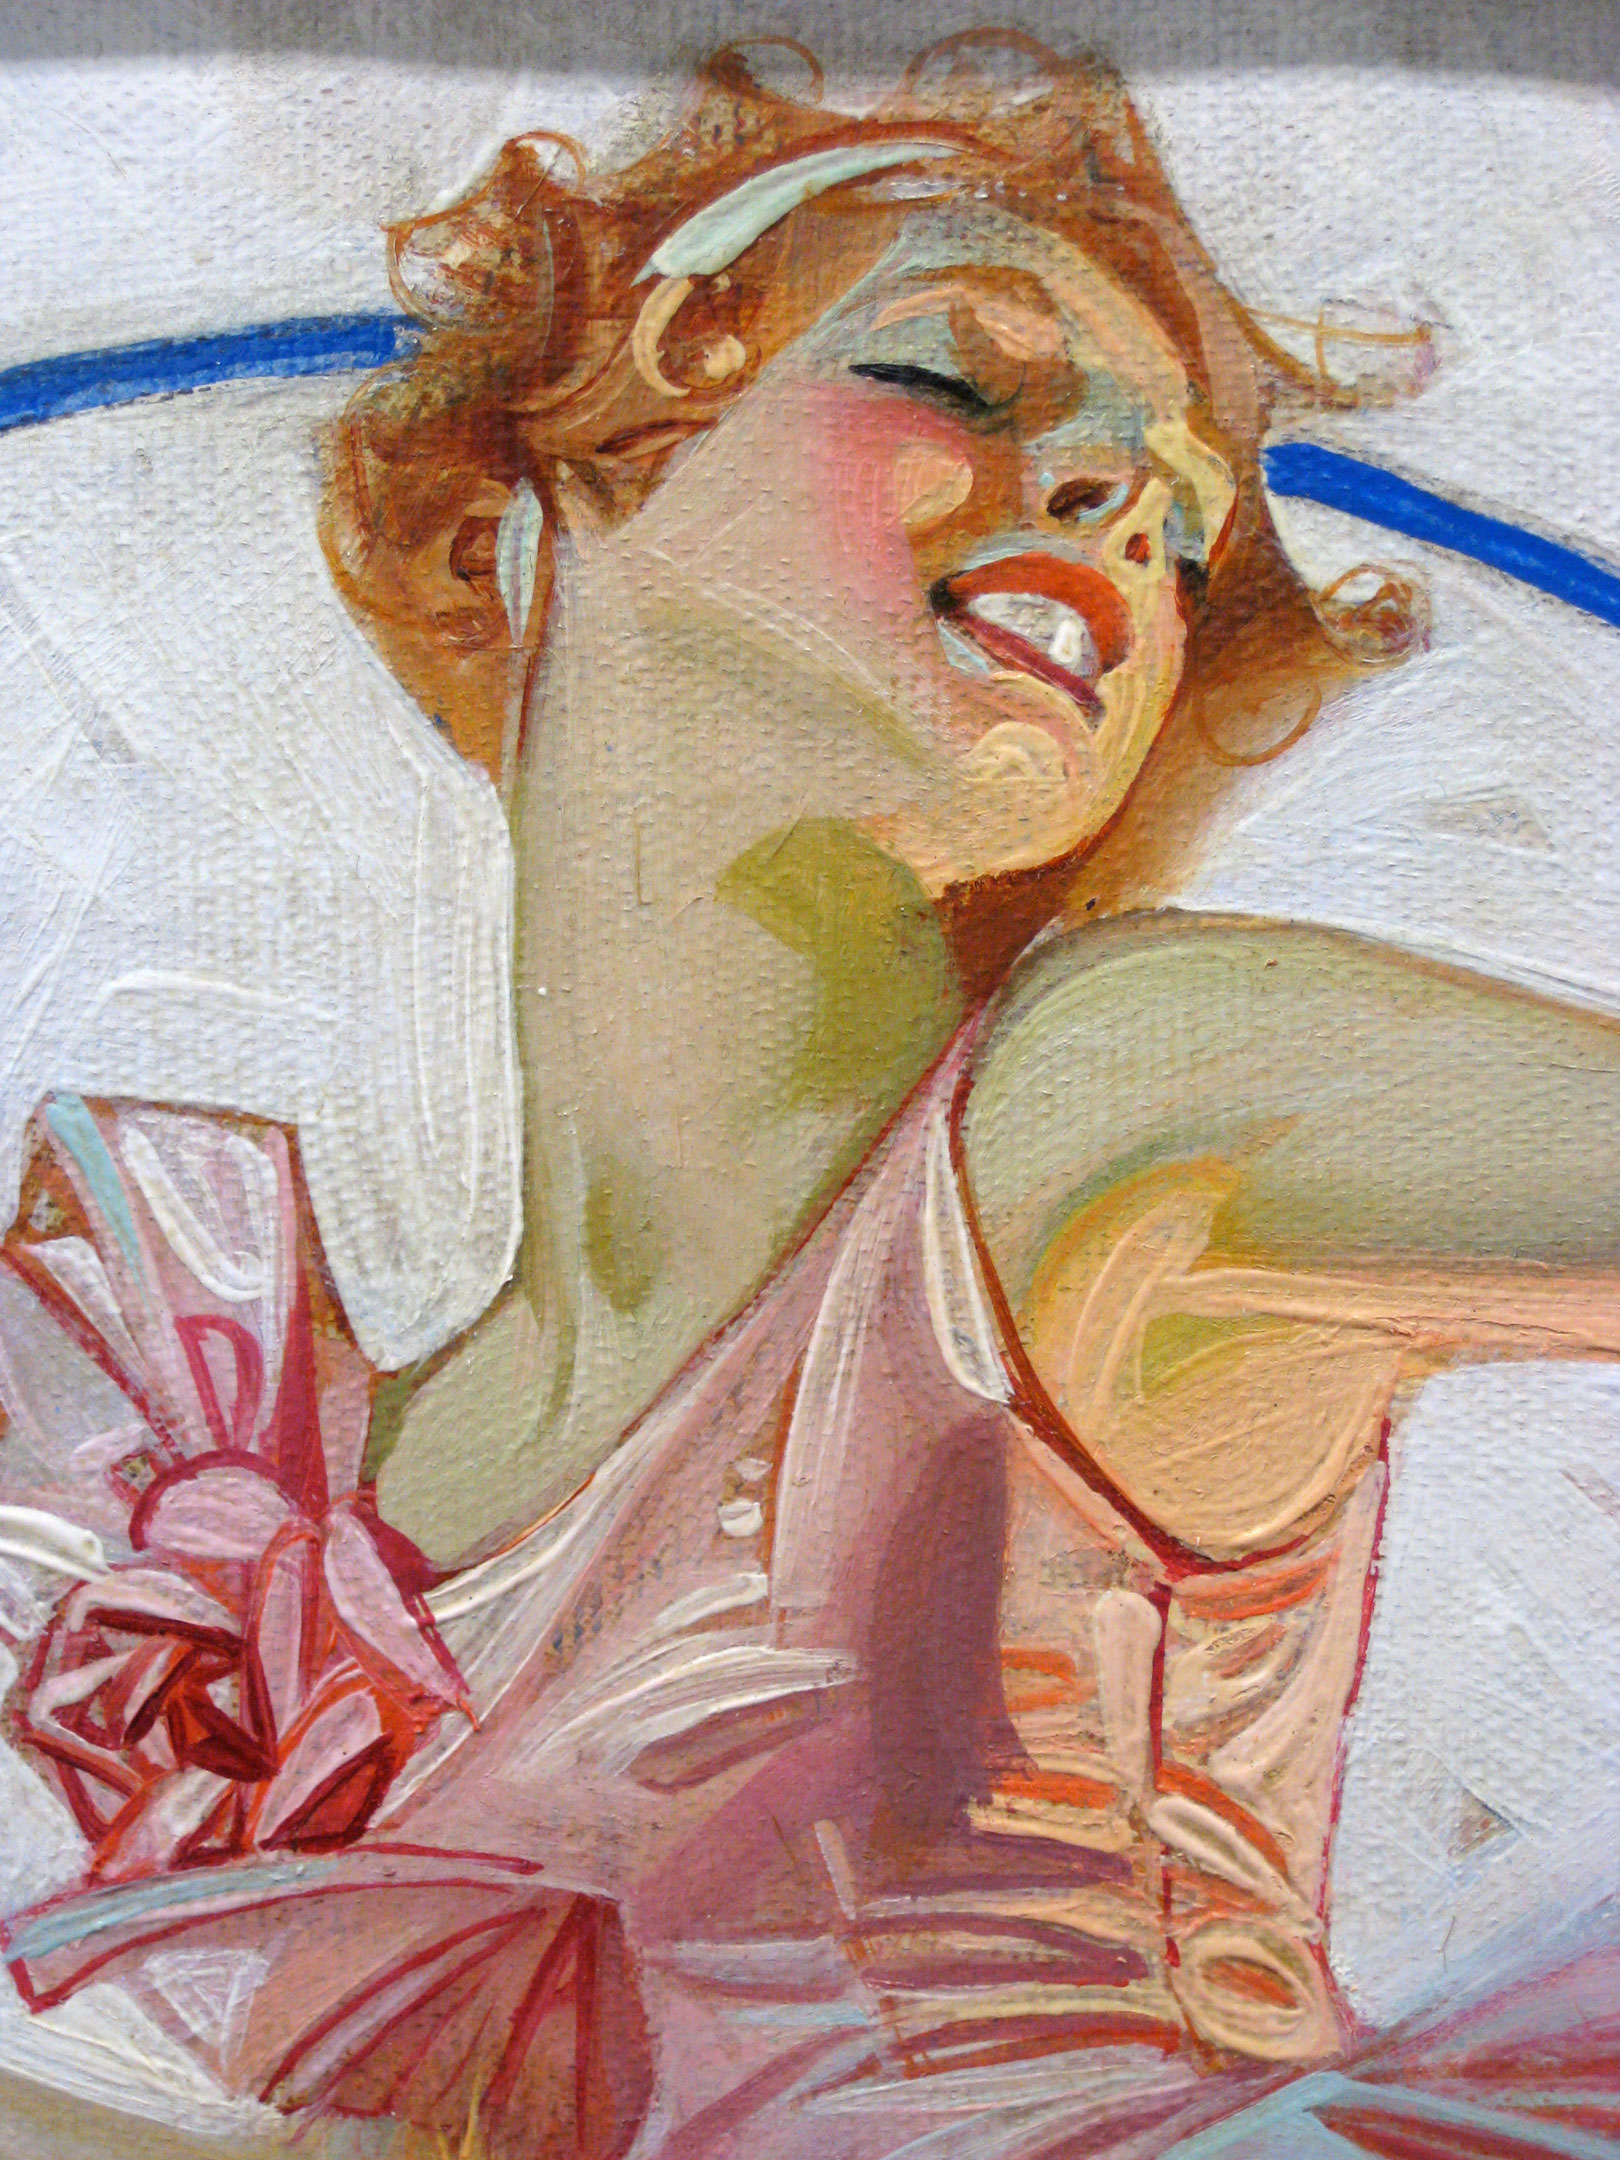 extreme close up of a circus horse acrobat from a Leyendecker painting